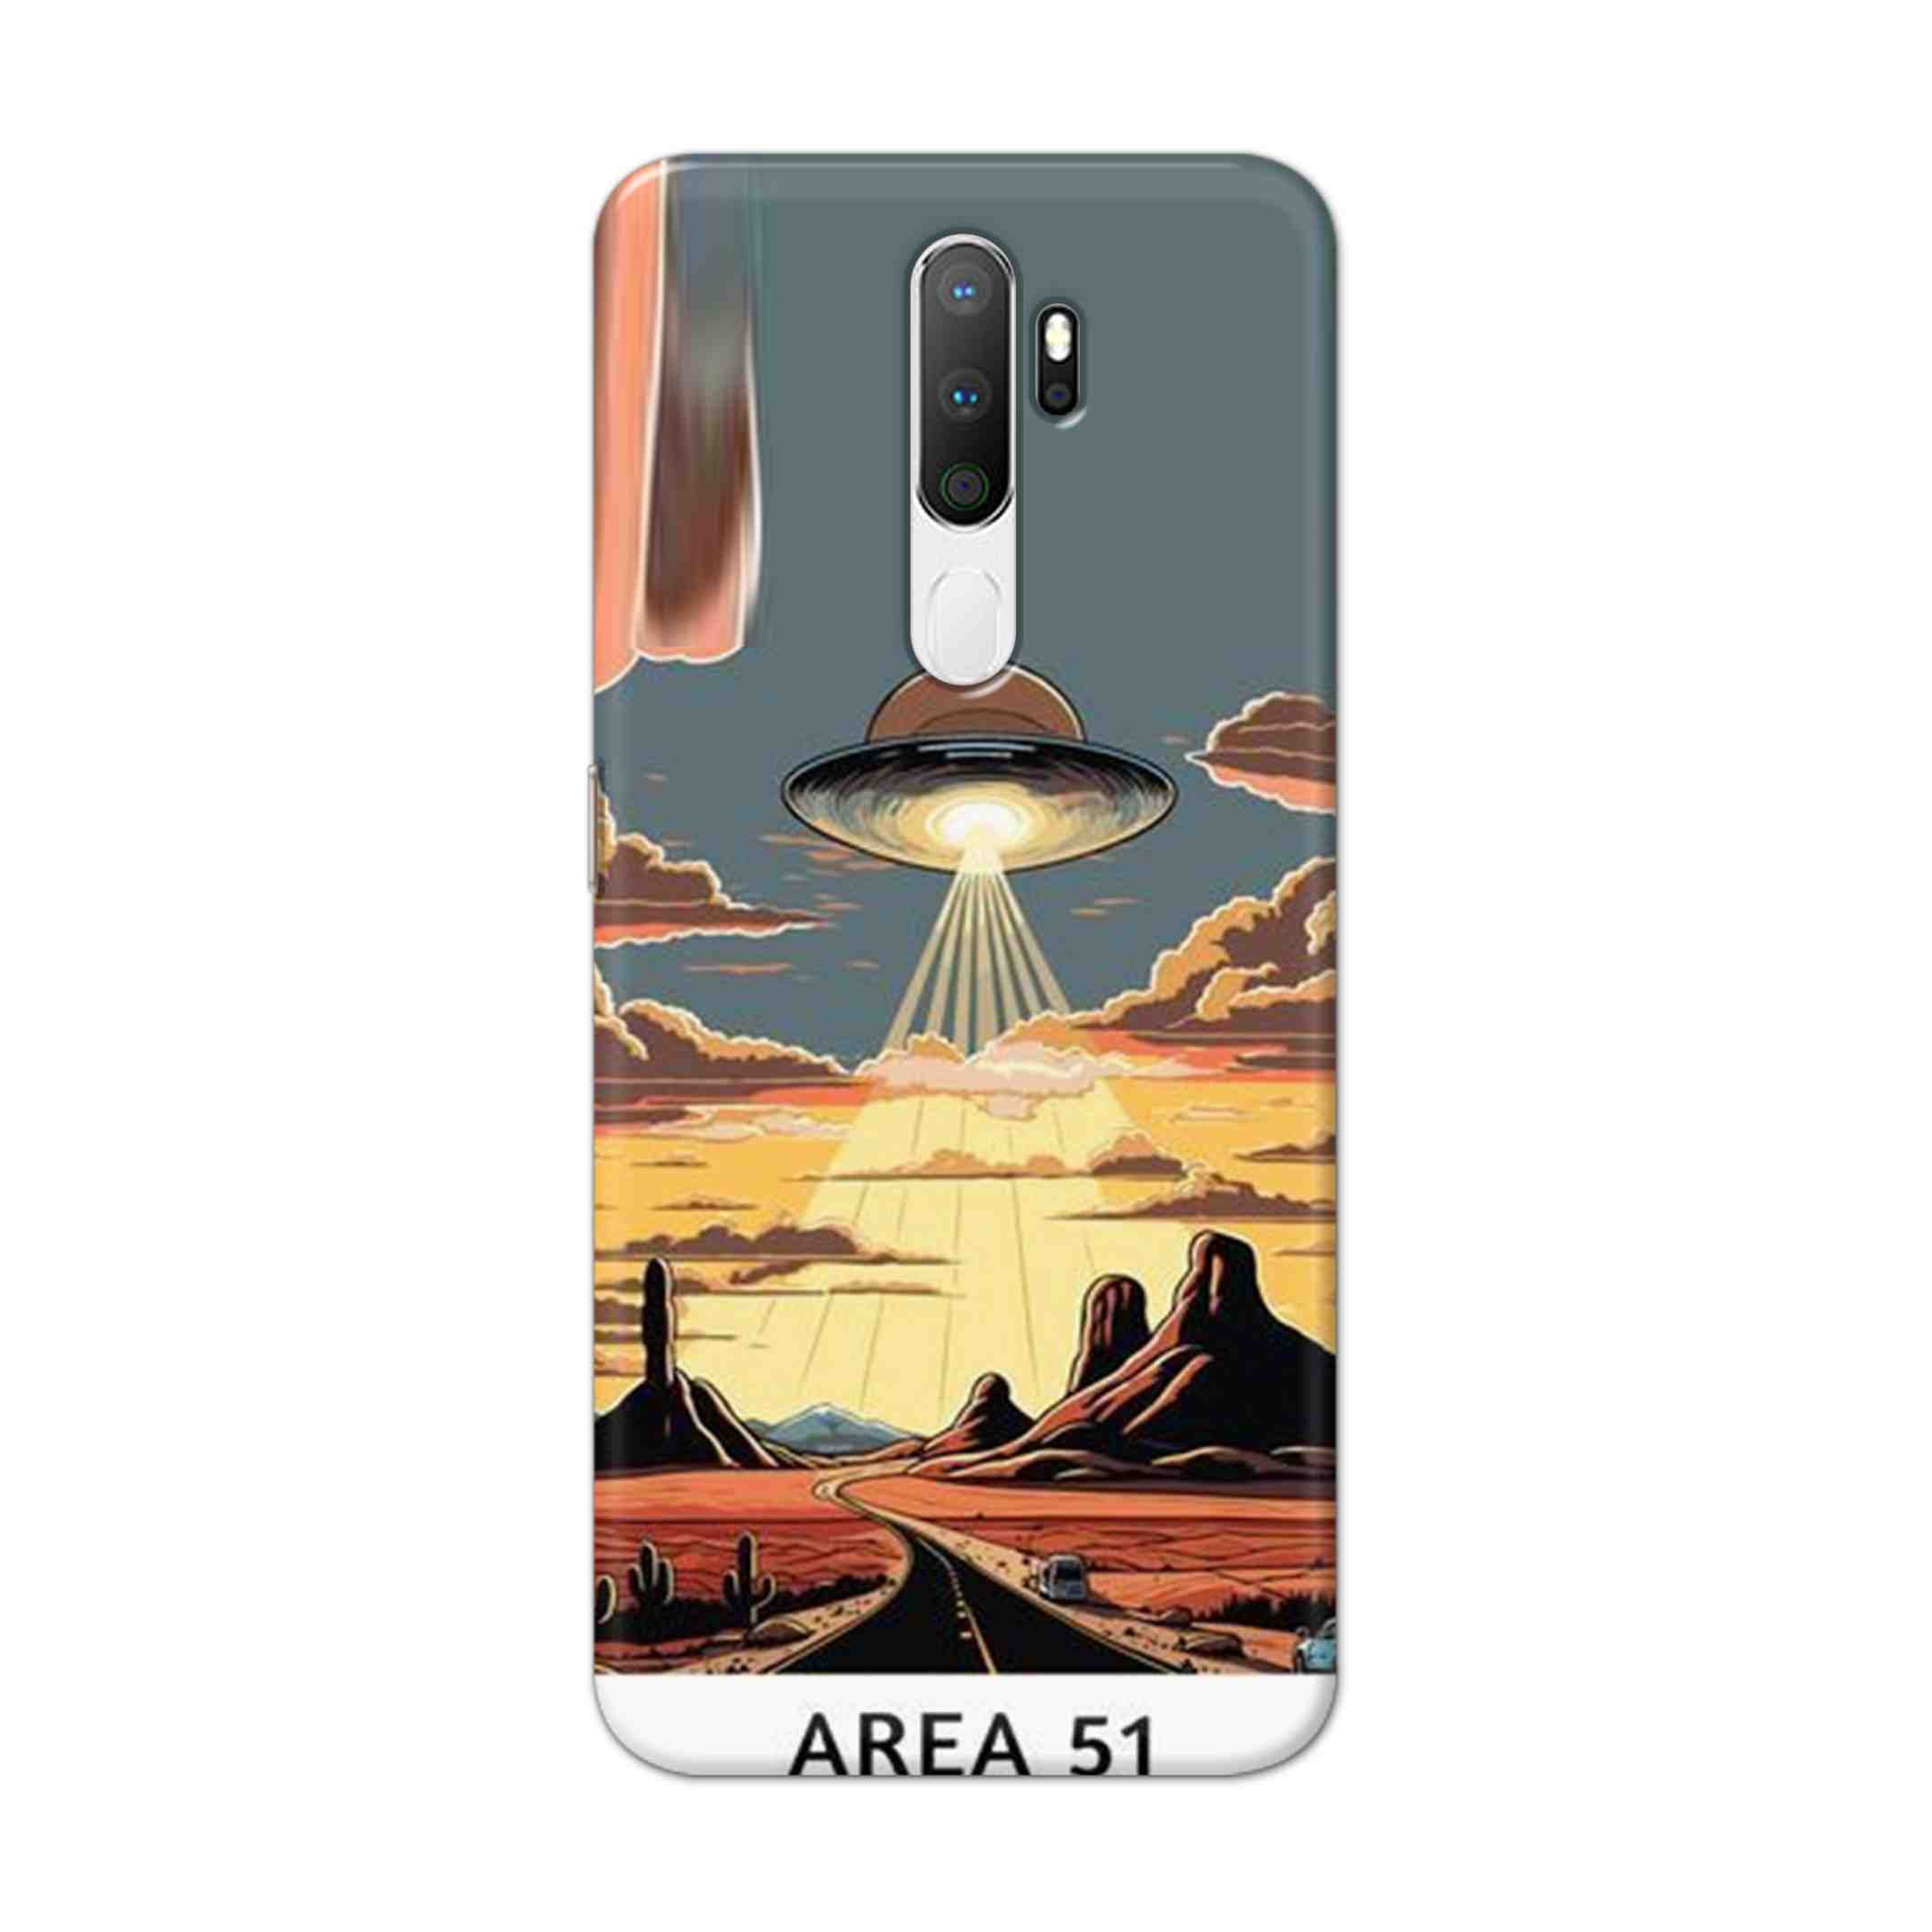 Buy Area 51 Hard Back Mobile Phone Case Cover For Oppo A5 (2020) Online